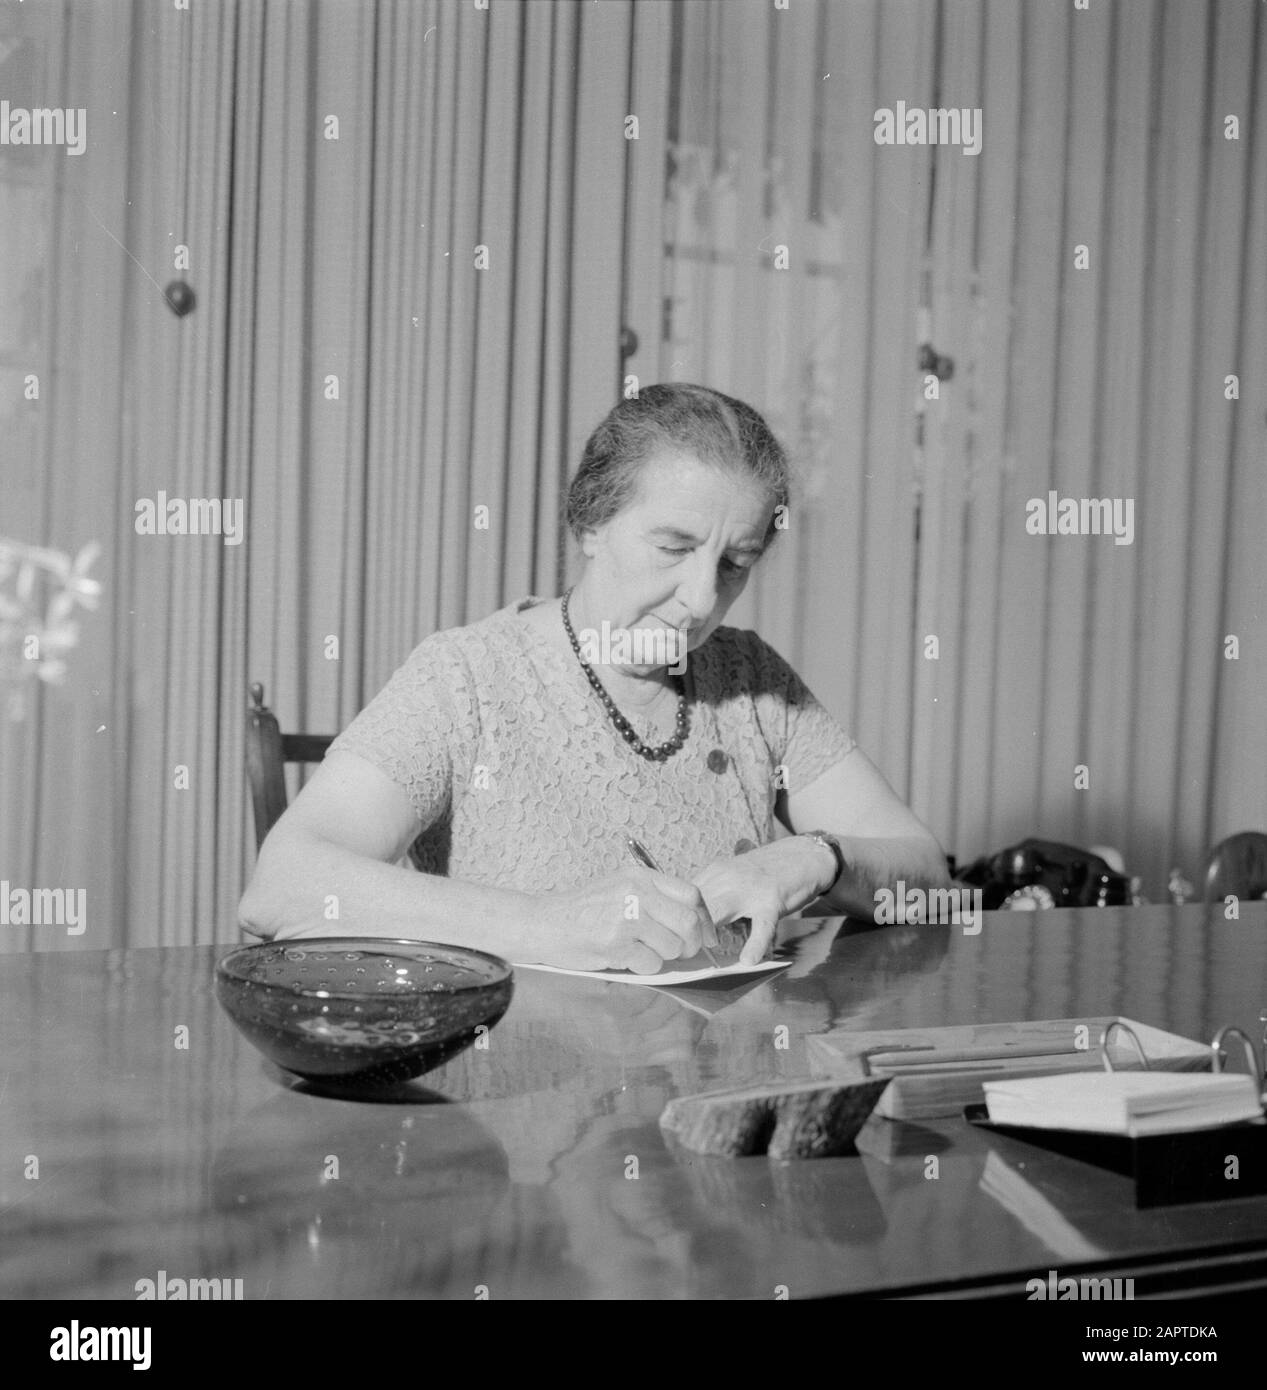 Golda Meir, Minister of Foreign Affairs of Israel Date: January 1, 1964 Location: Israel Keywords: ministers, portraits Personal name: Meir, Golda Stock Photo